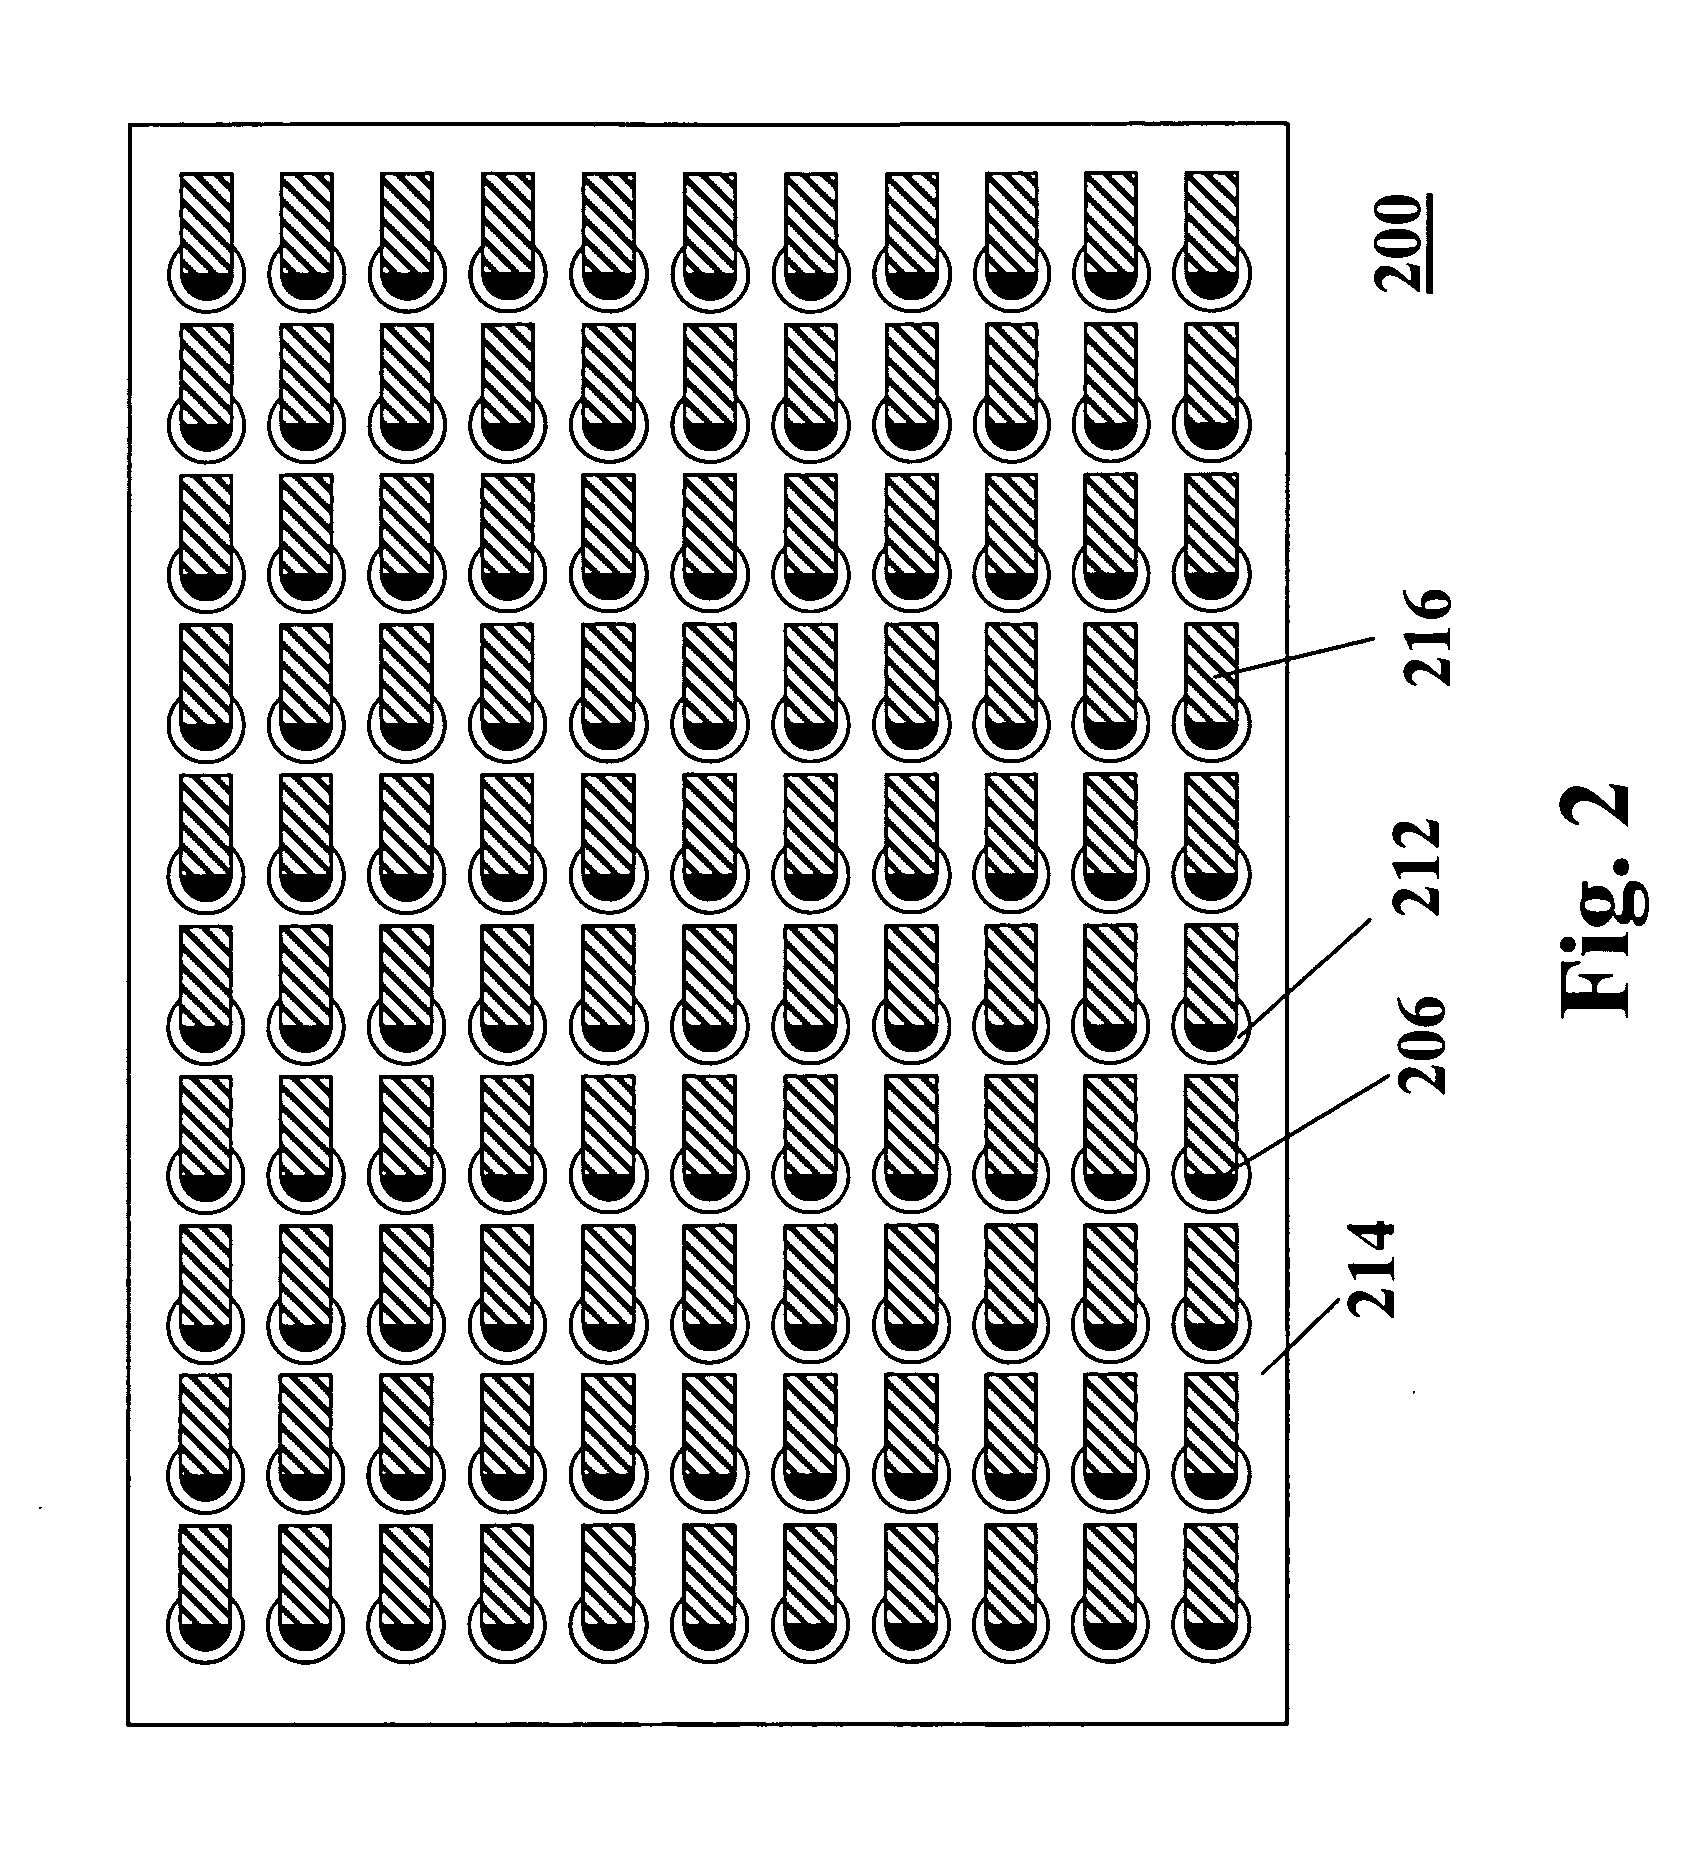 Circuit and method for enhanced low frequency switching noise suppression in multilayer printed circuit boards using a chip capacitor lattice